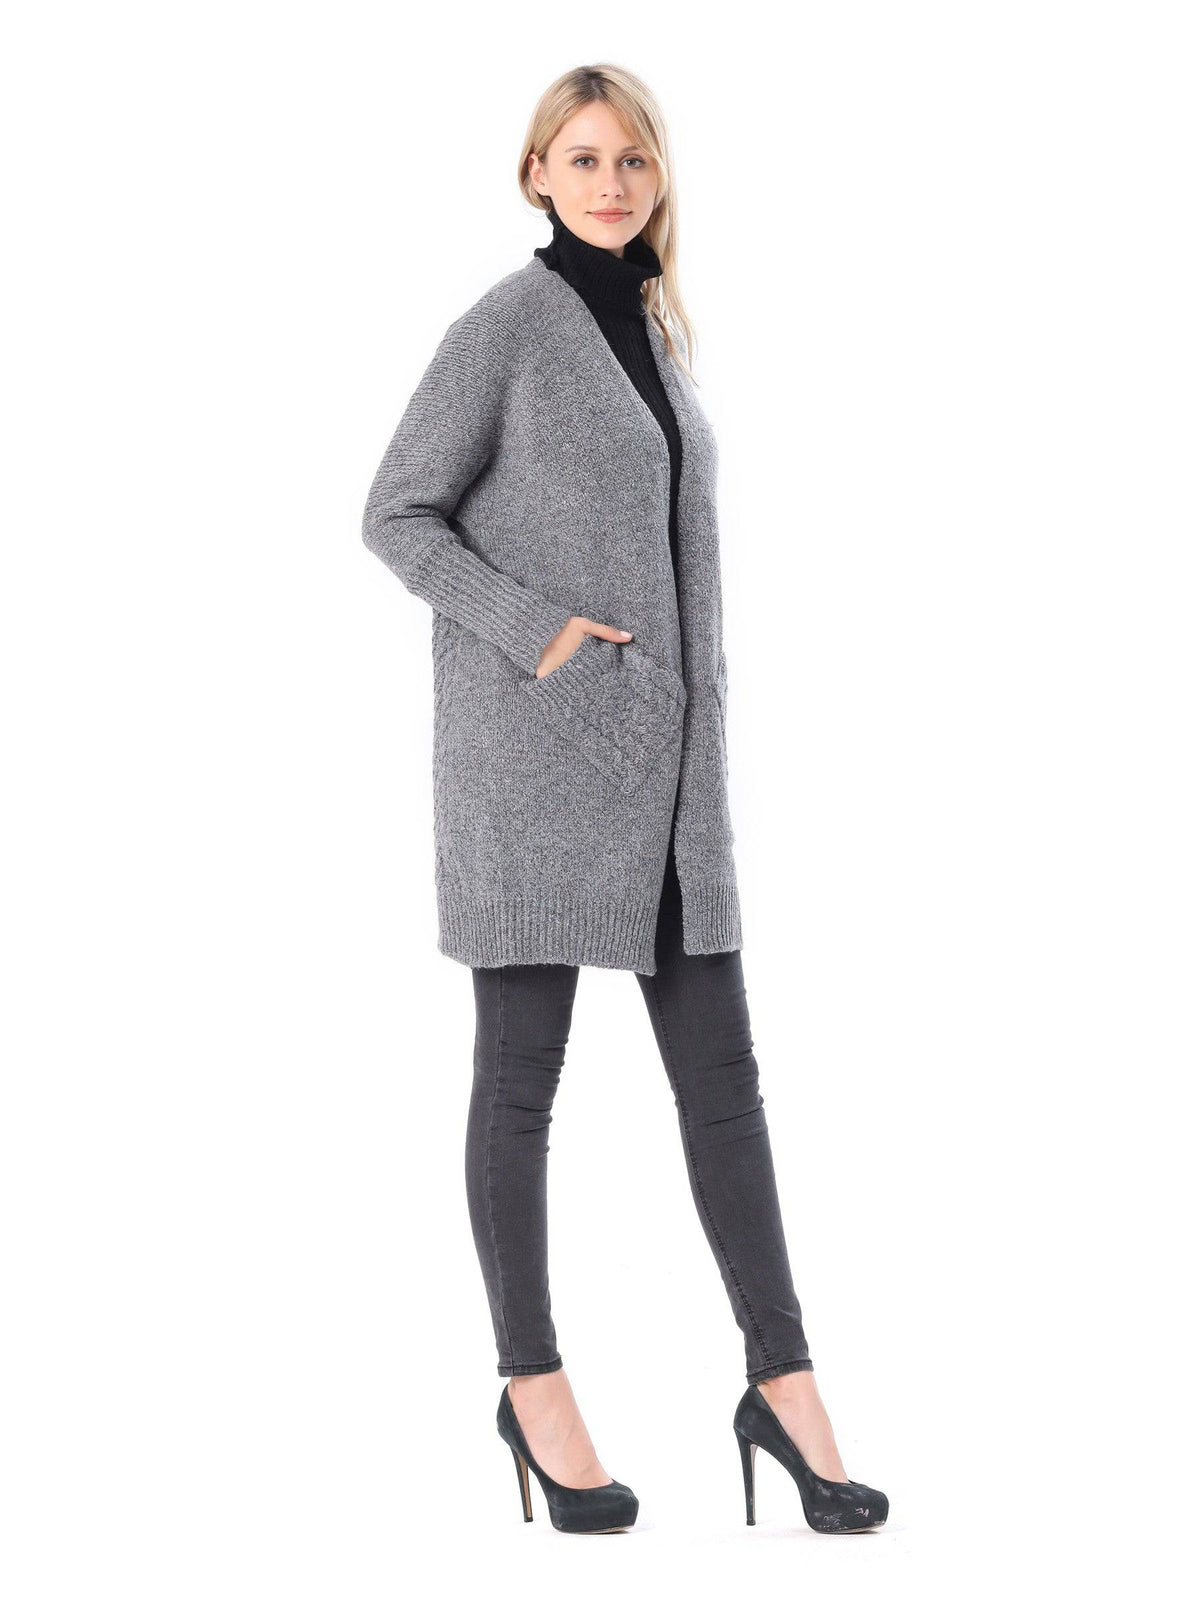 Women's Open Front Knitted Dark Grey Sweater | Sweaters & Cardigans - NORMA REED